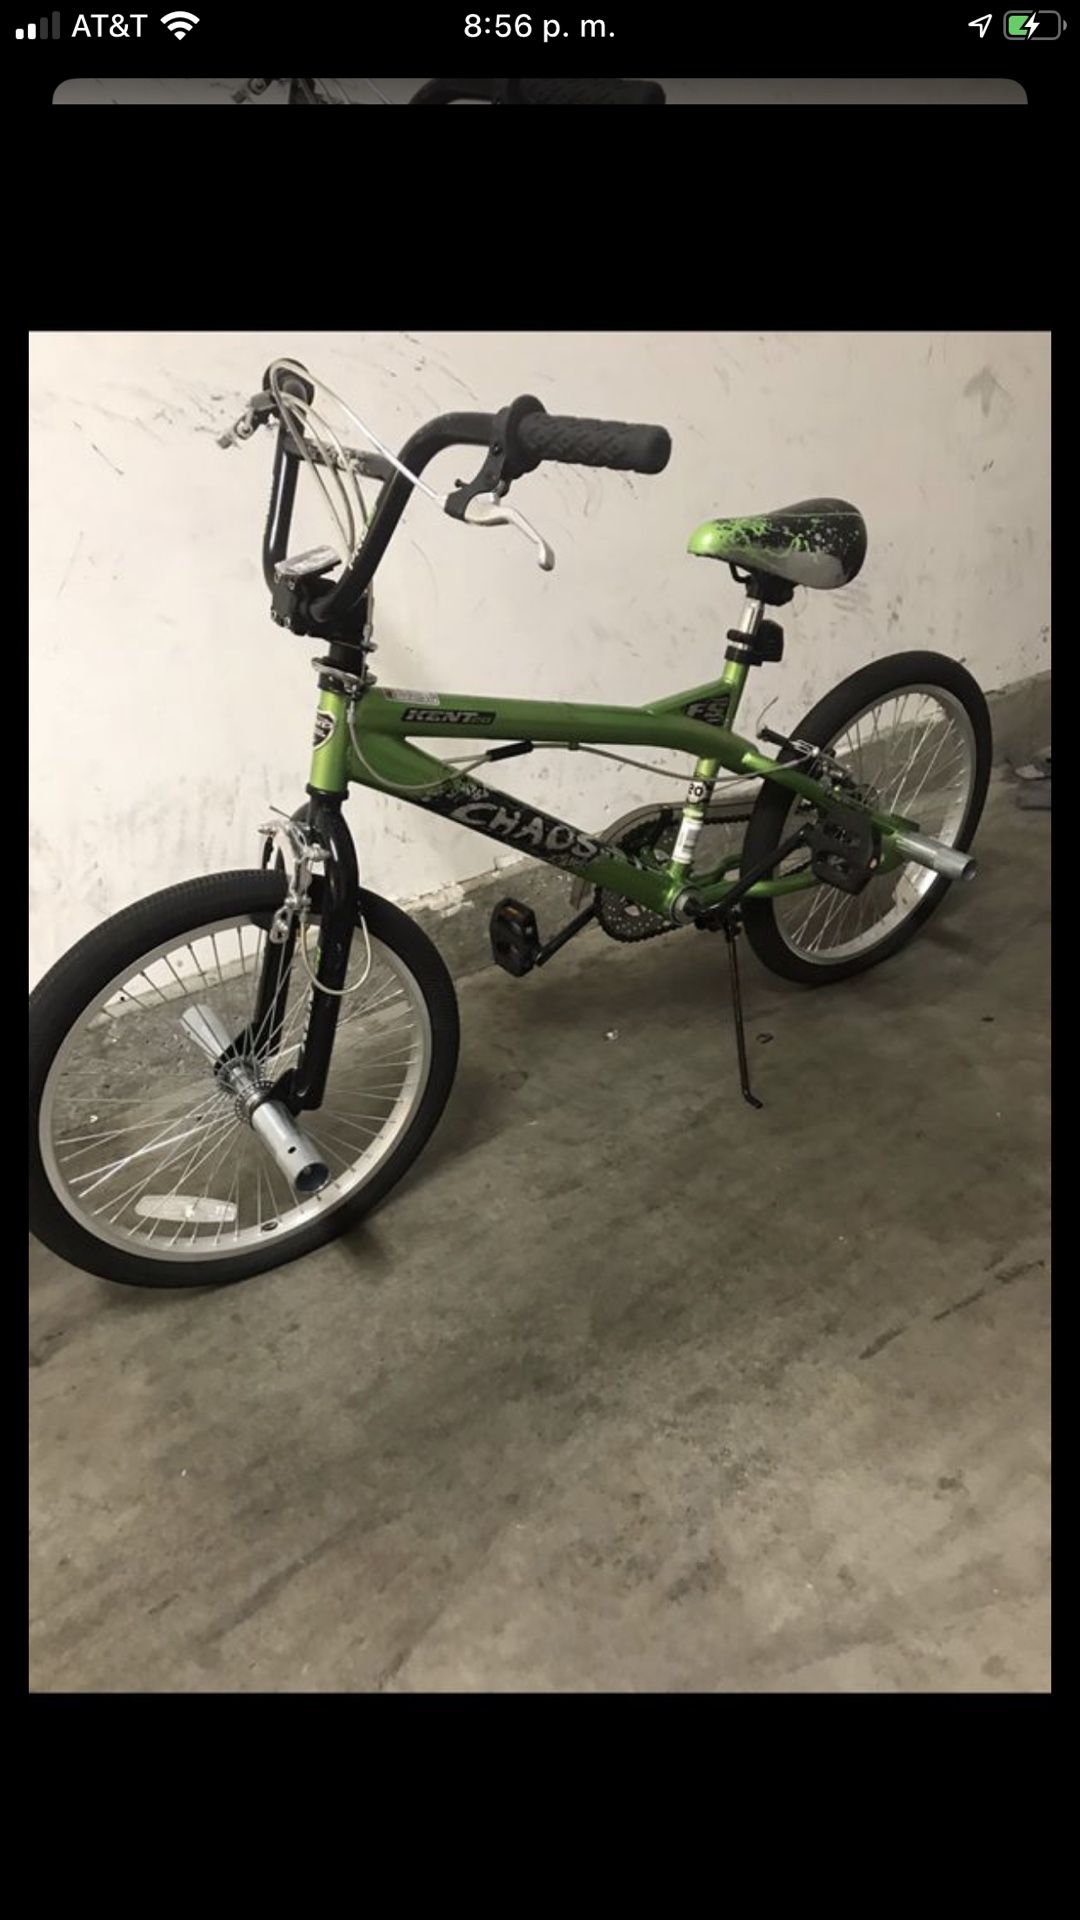 Bike In good condition